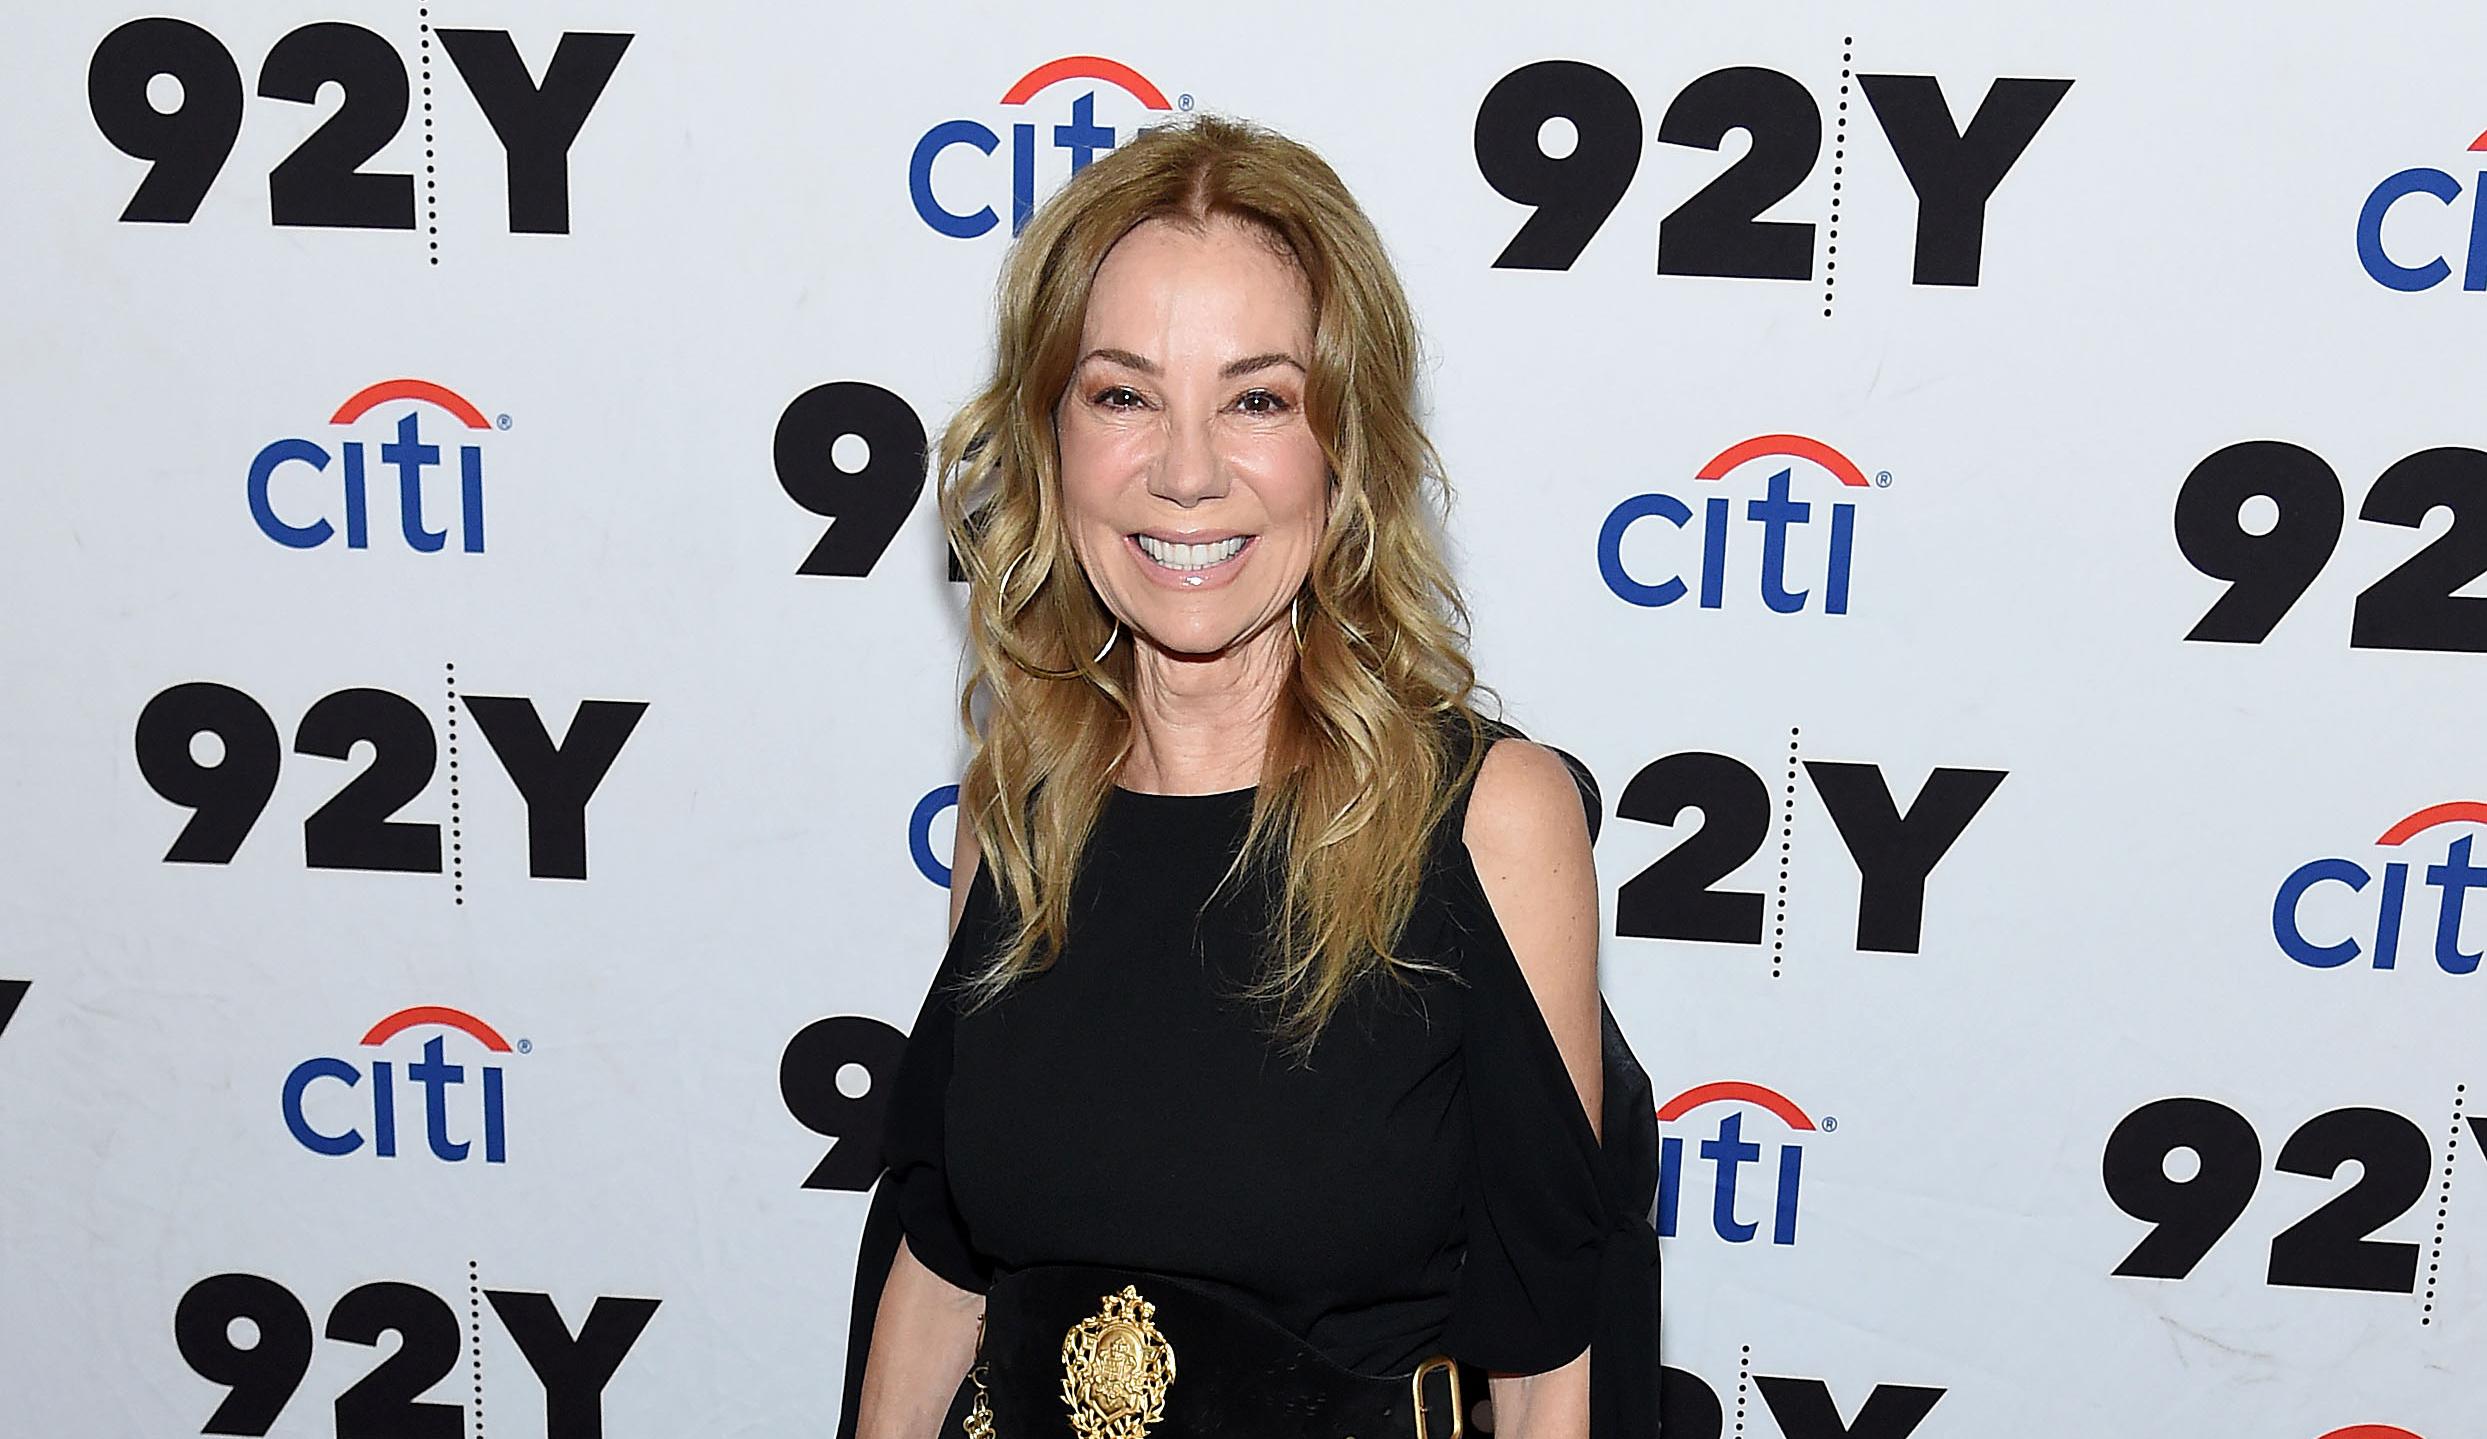 Kathie Lee Gifford attending an event in a black dress.